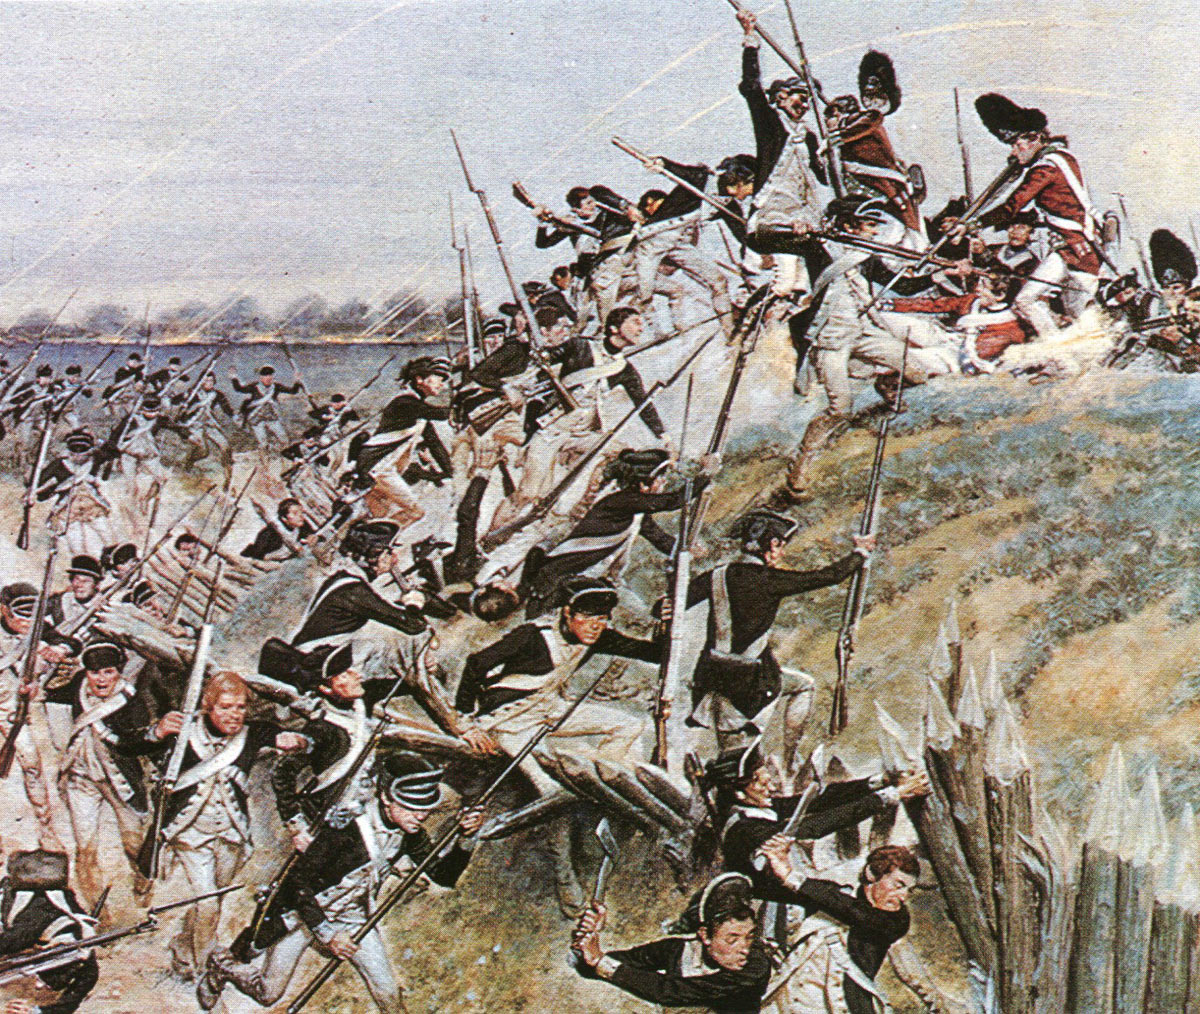 American troops storming a British redoubt: Battle of Yorktown 28th September to 19th October 1781 in the American Revolutionary War